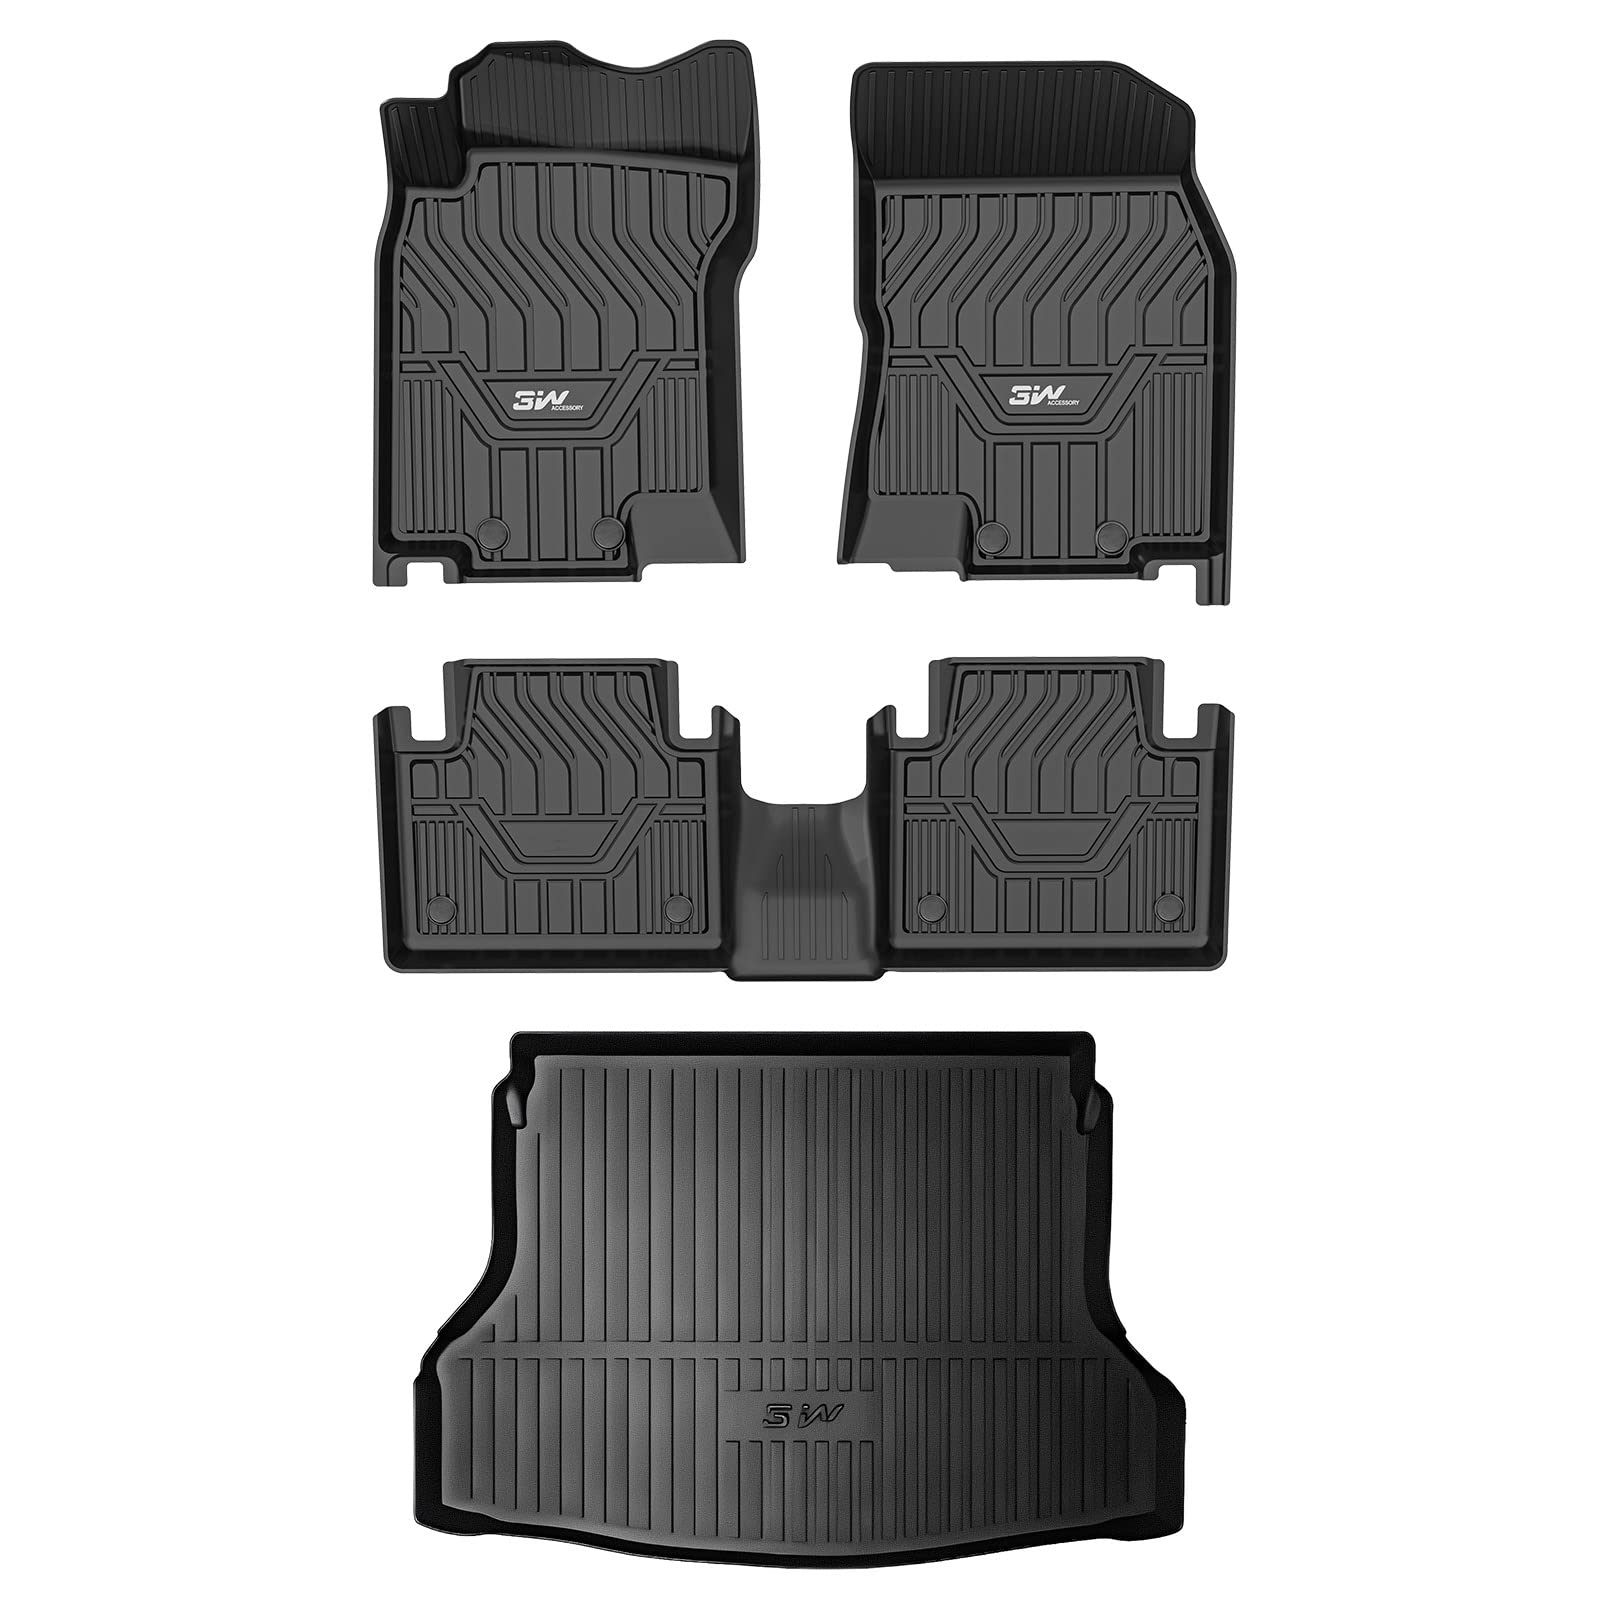 3W Nissan Rogue 2014-2020 Custom Floor Mats Cargo Liner TPE Material & All-Weather Protection Vehicles & Parts 3Wliners 2014-2020 Rogue 2014-2020 1st&2nd Row Mats+Rear Trunk Mat